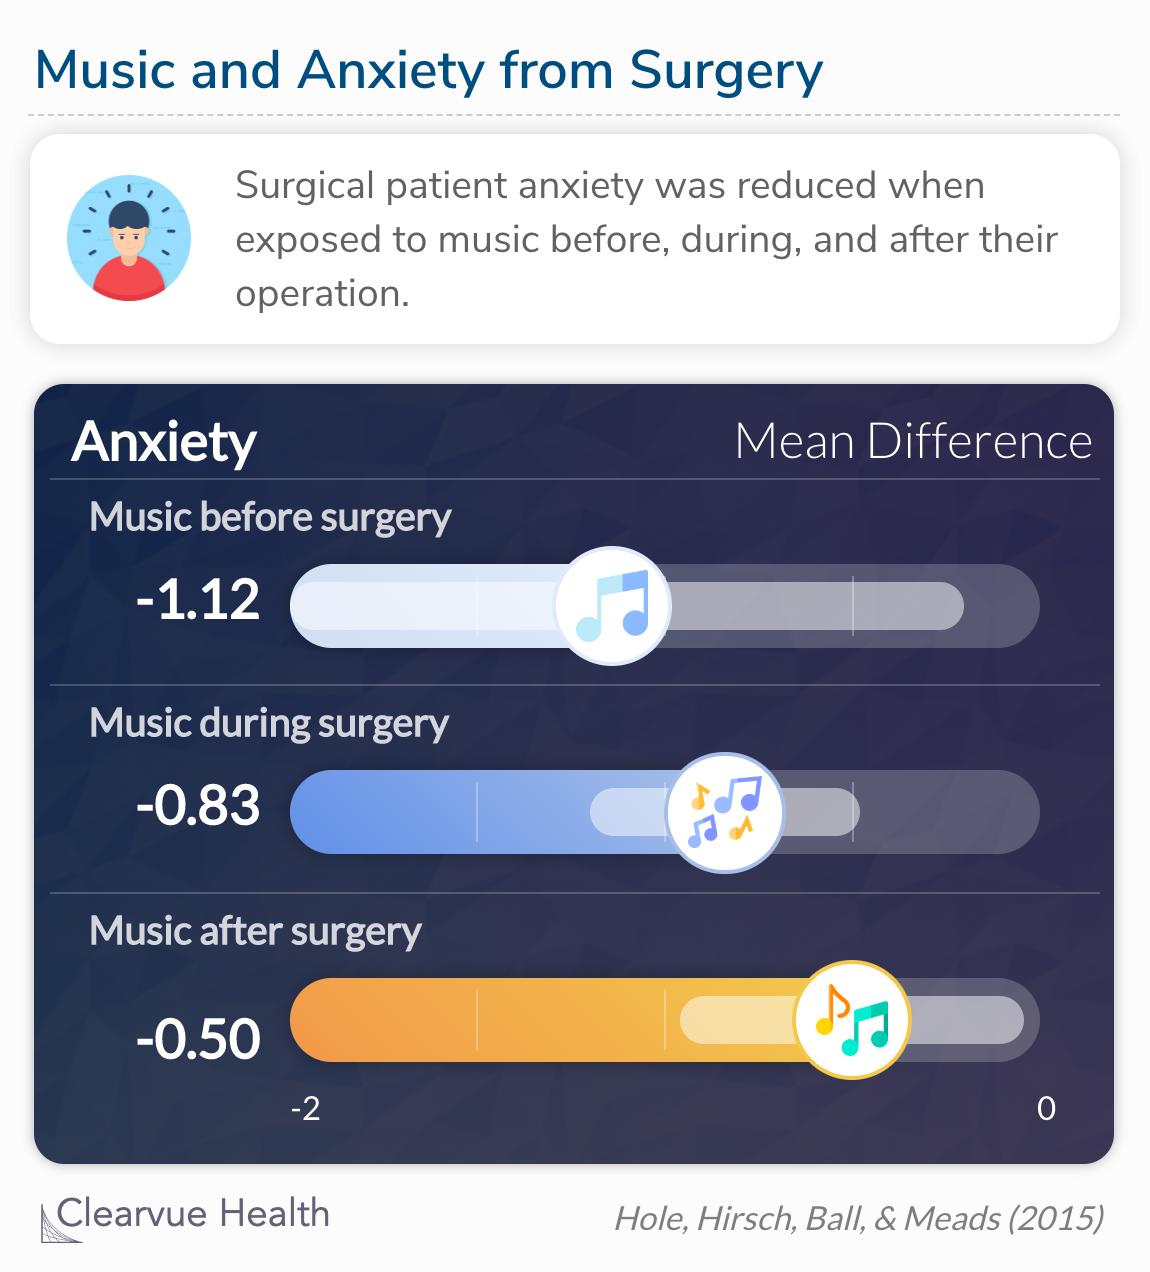 Anxiety was reduced when music was used pre, intra, and post-operatively.